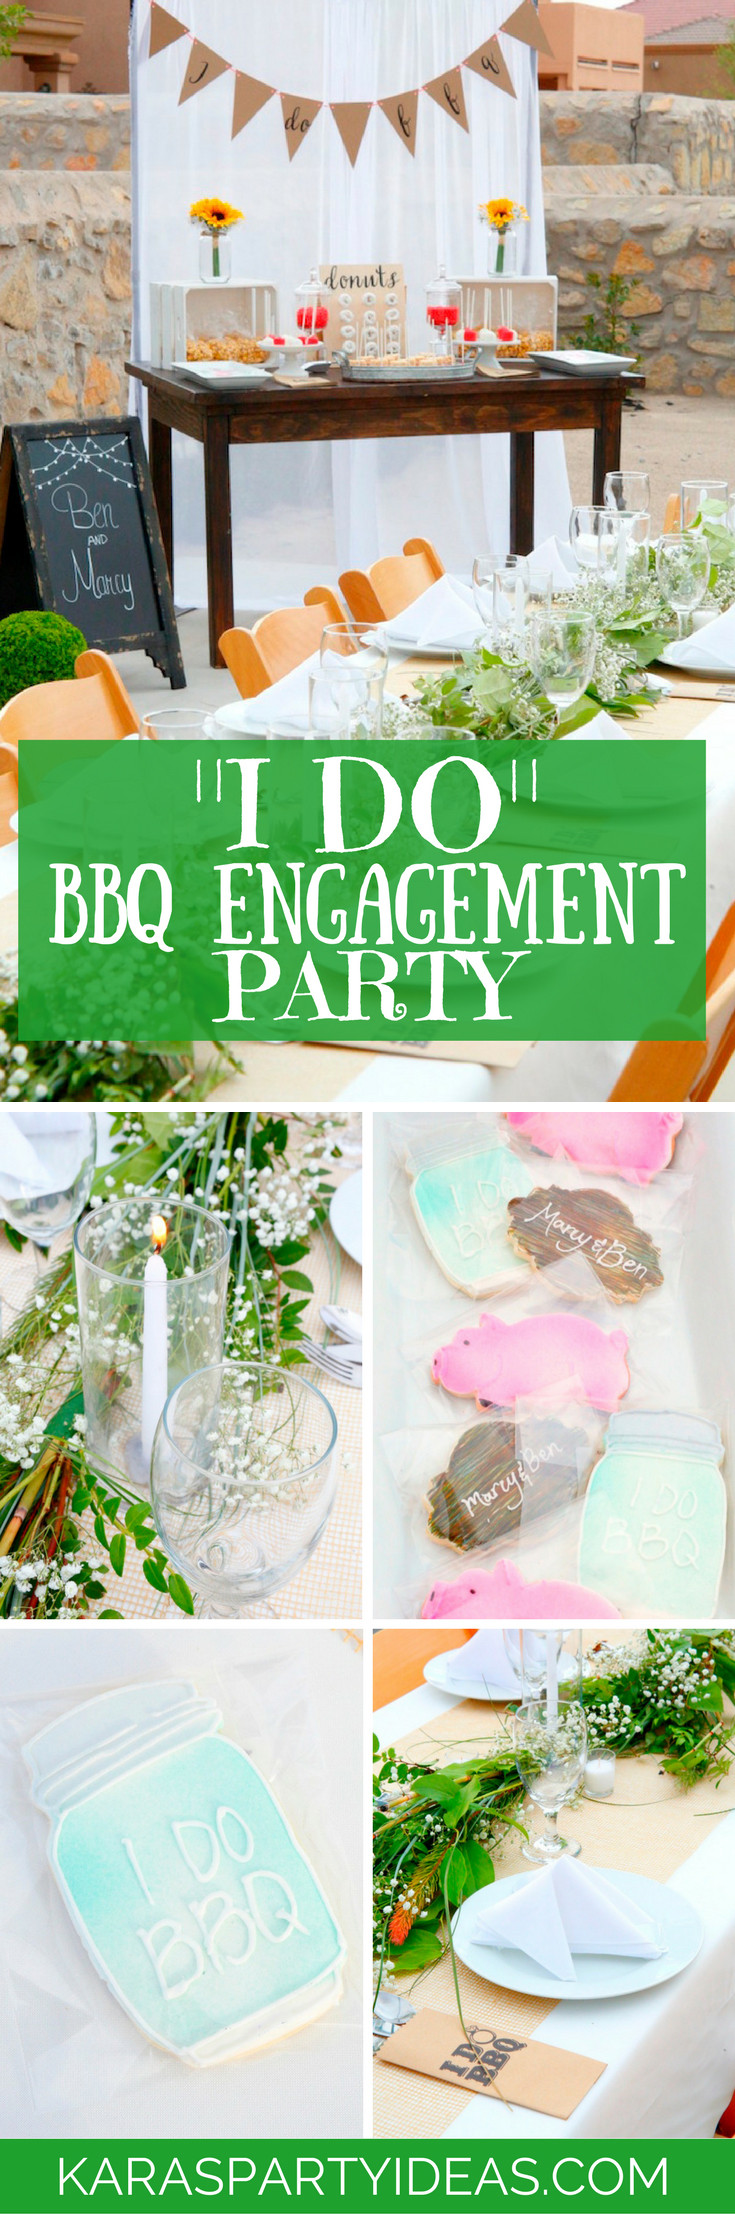 Barbecue Engagement Party Ideas
 Kara s Party Ideas "I Do" BBQ Engagement Party